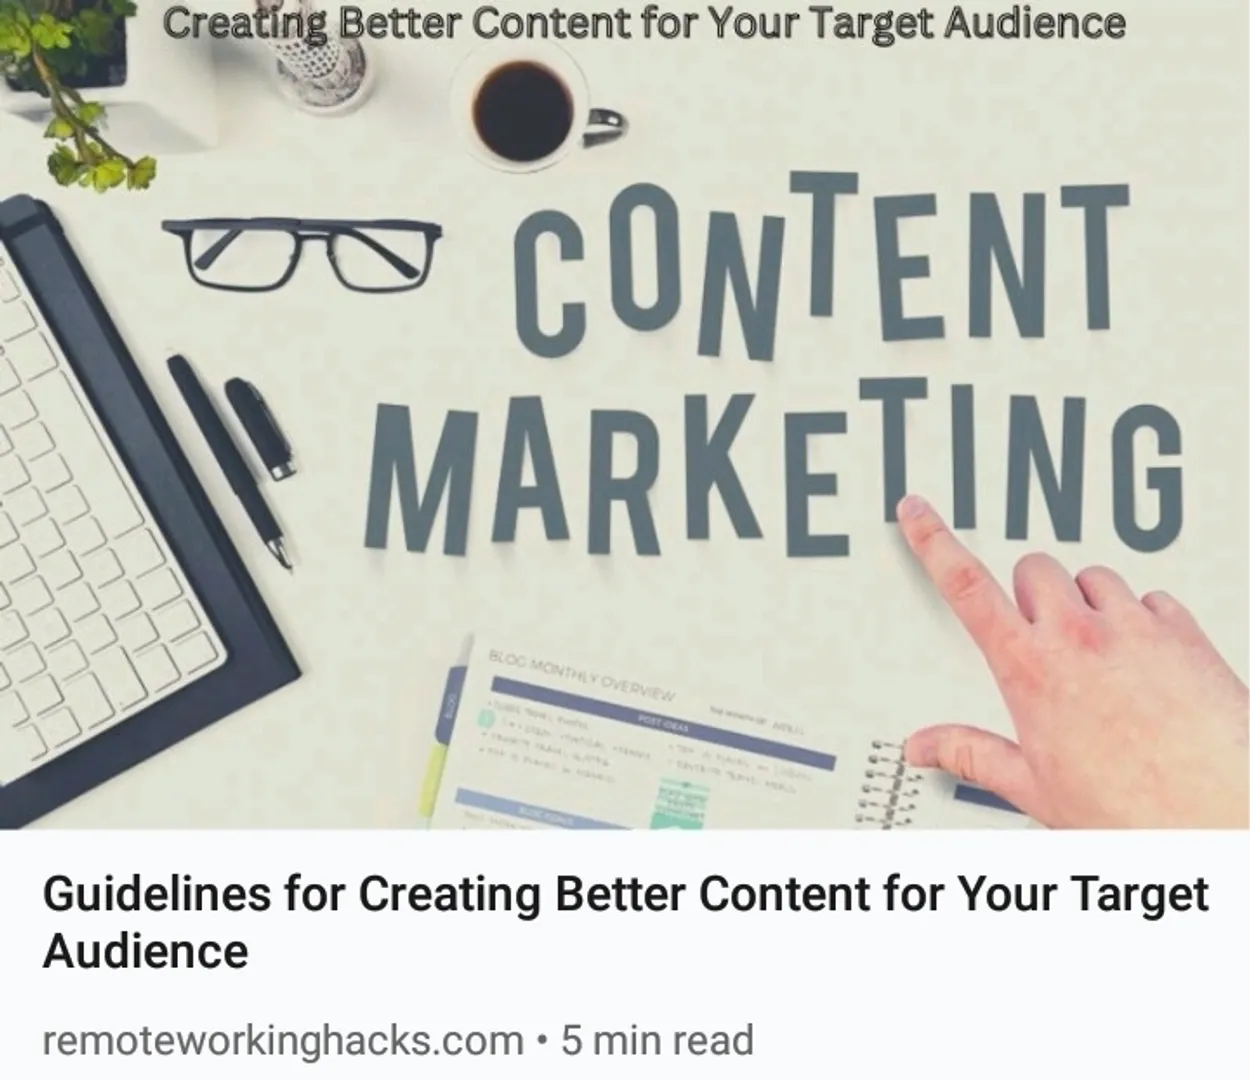 https://remoteworkinghacks.com/guidelines-for-creating-better-content-for-your-target-audience/

#contentmarketing
#Targetaudience
#contentwriting
#blogging
#blogpost
#remoteworker